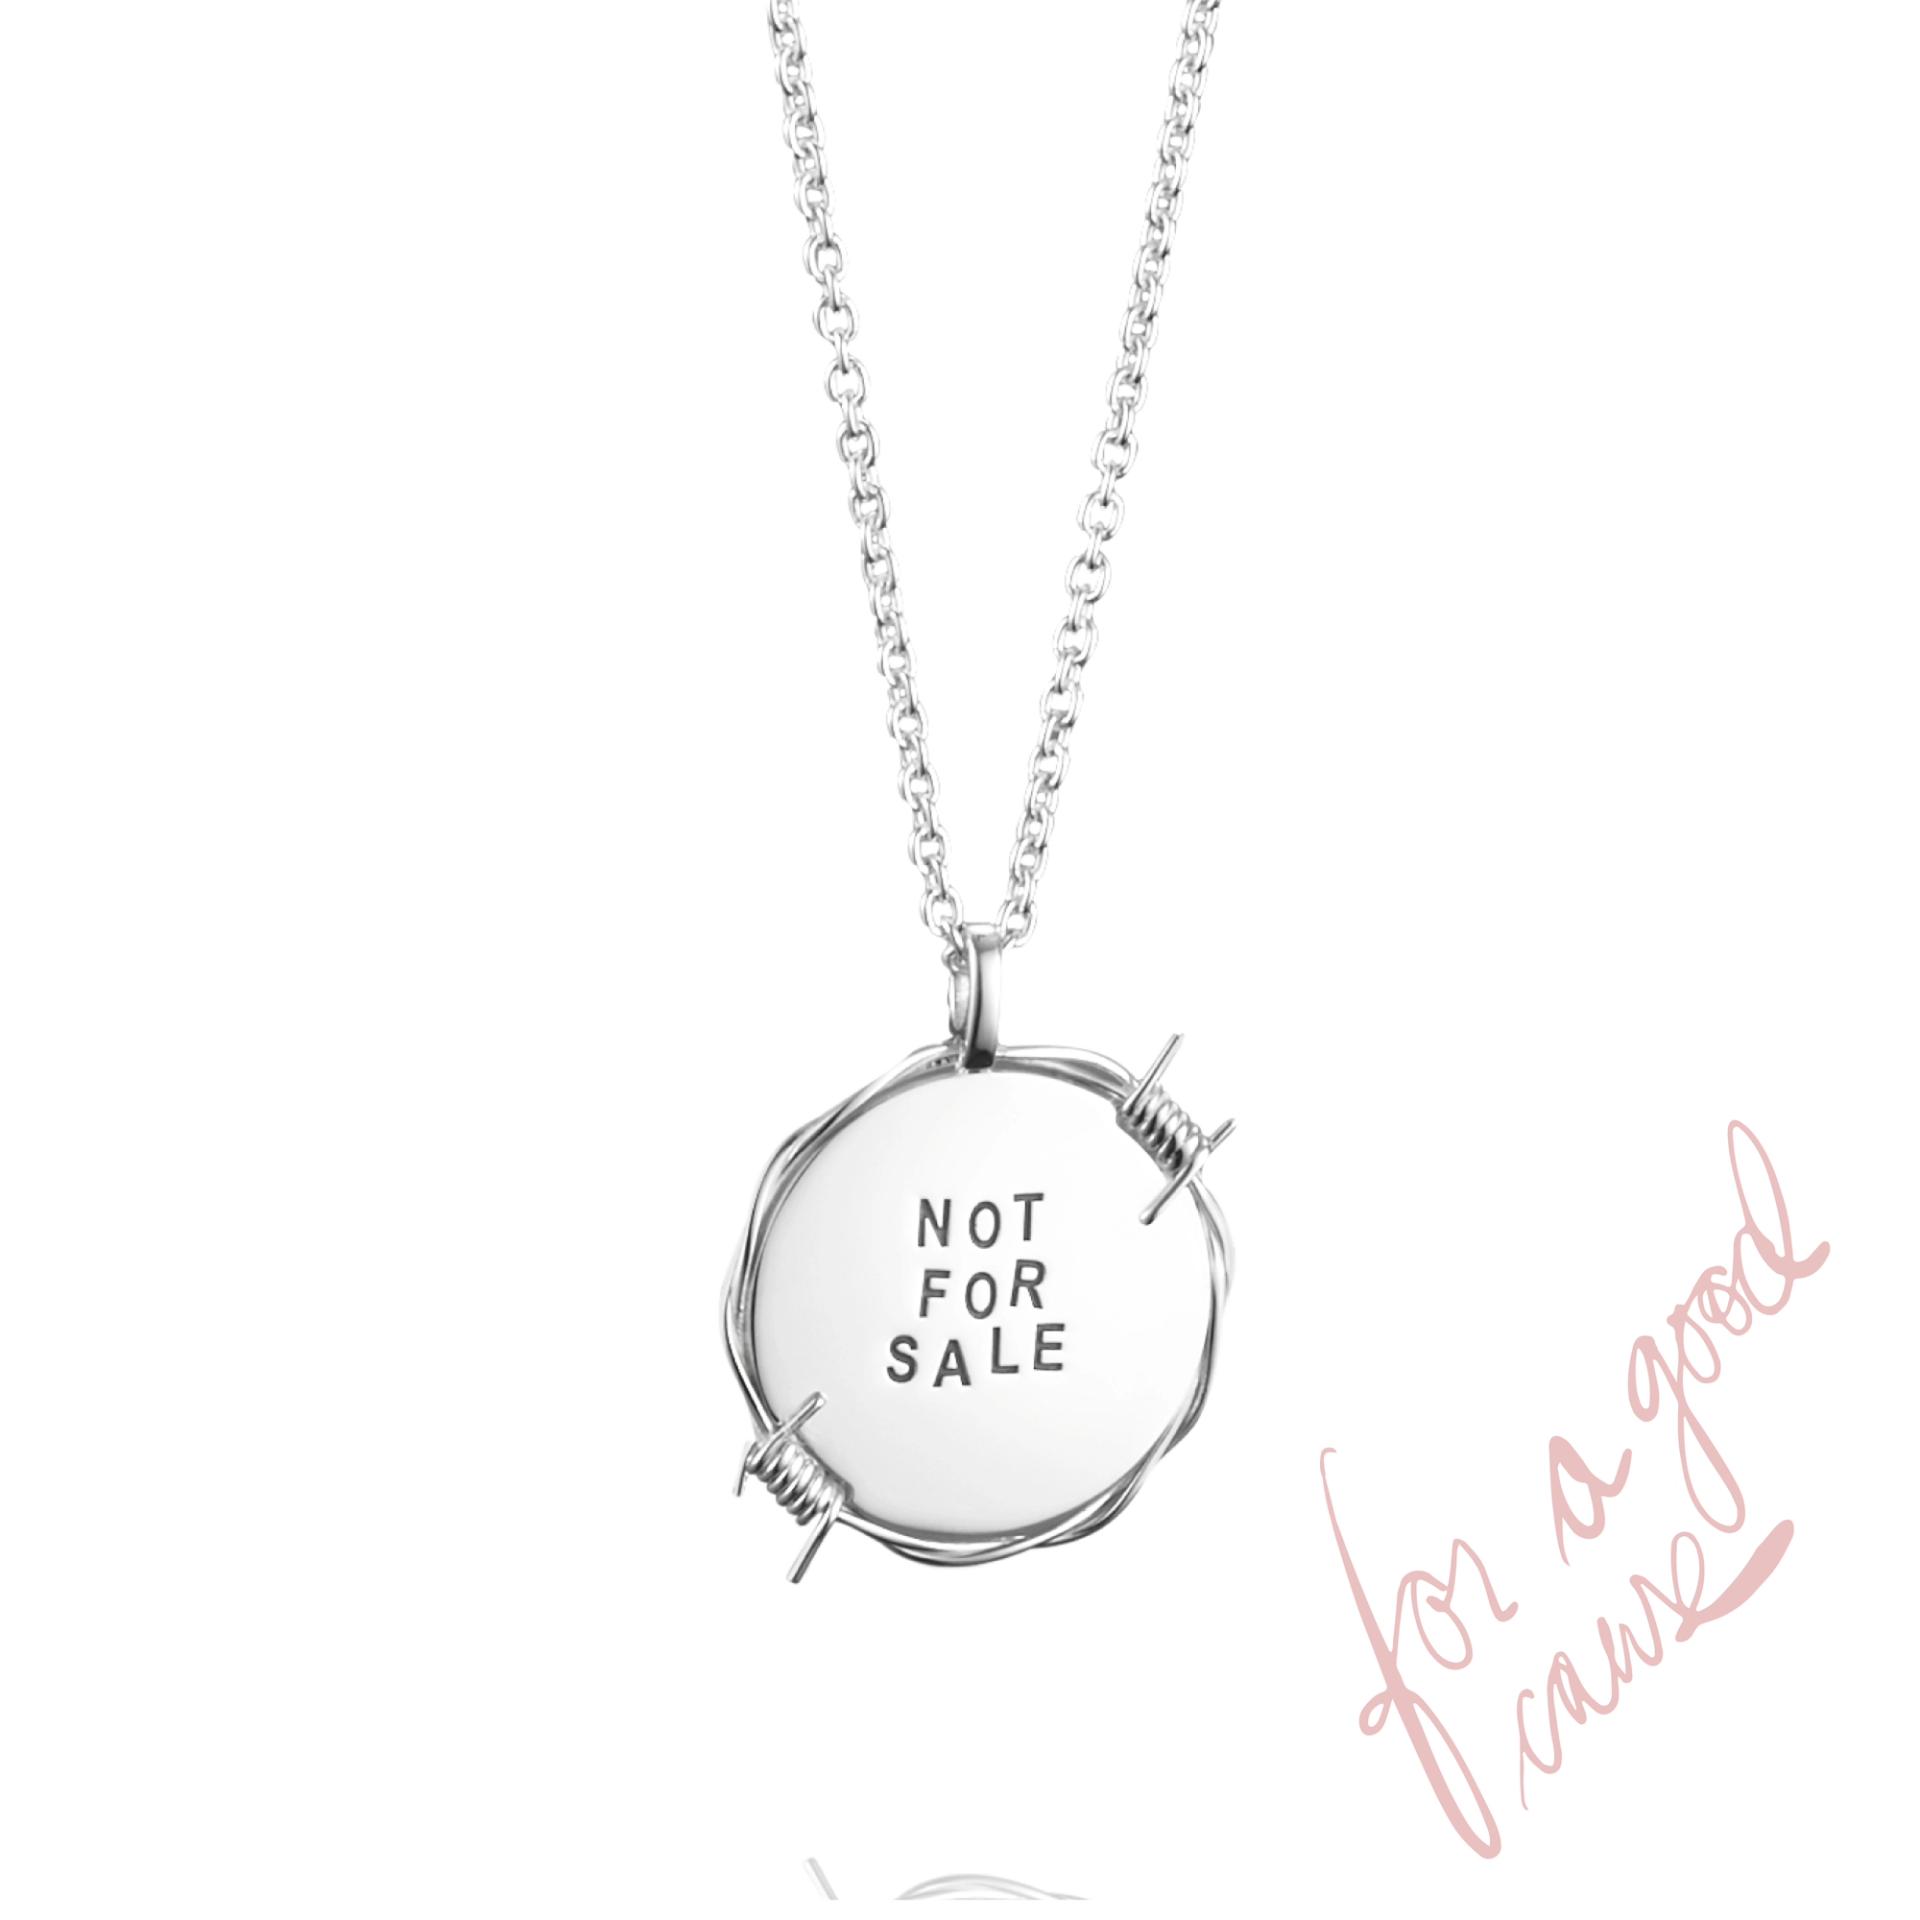 Not For Sale Pendant.